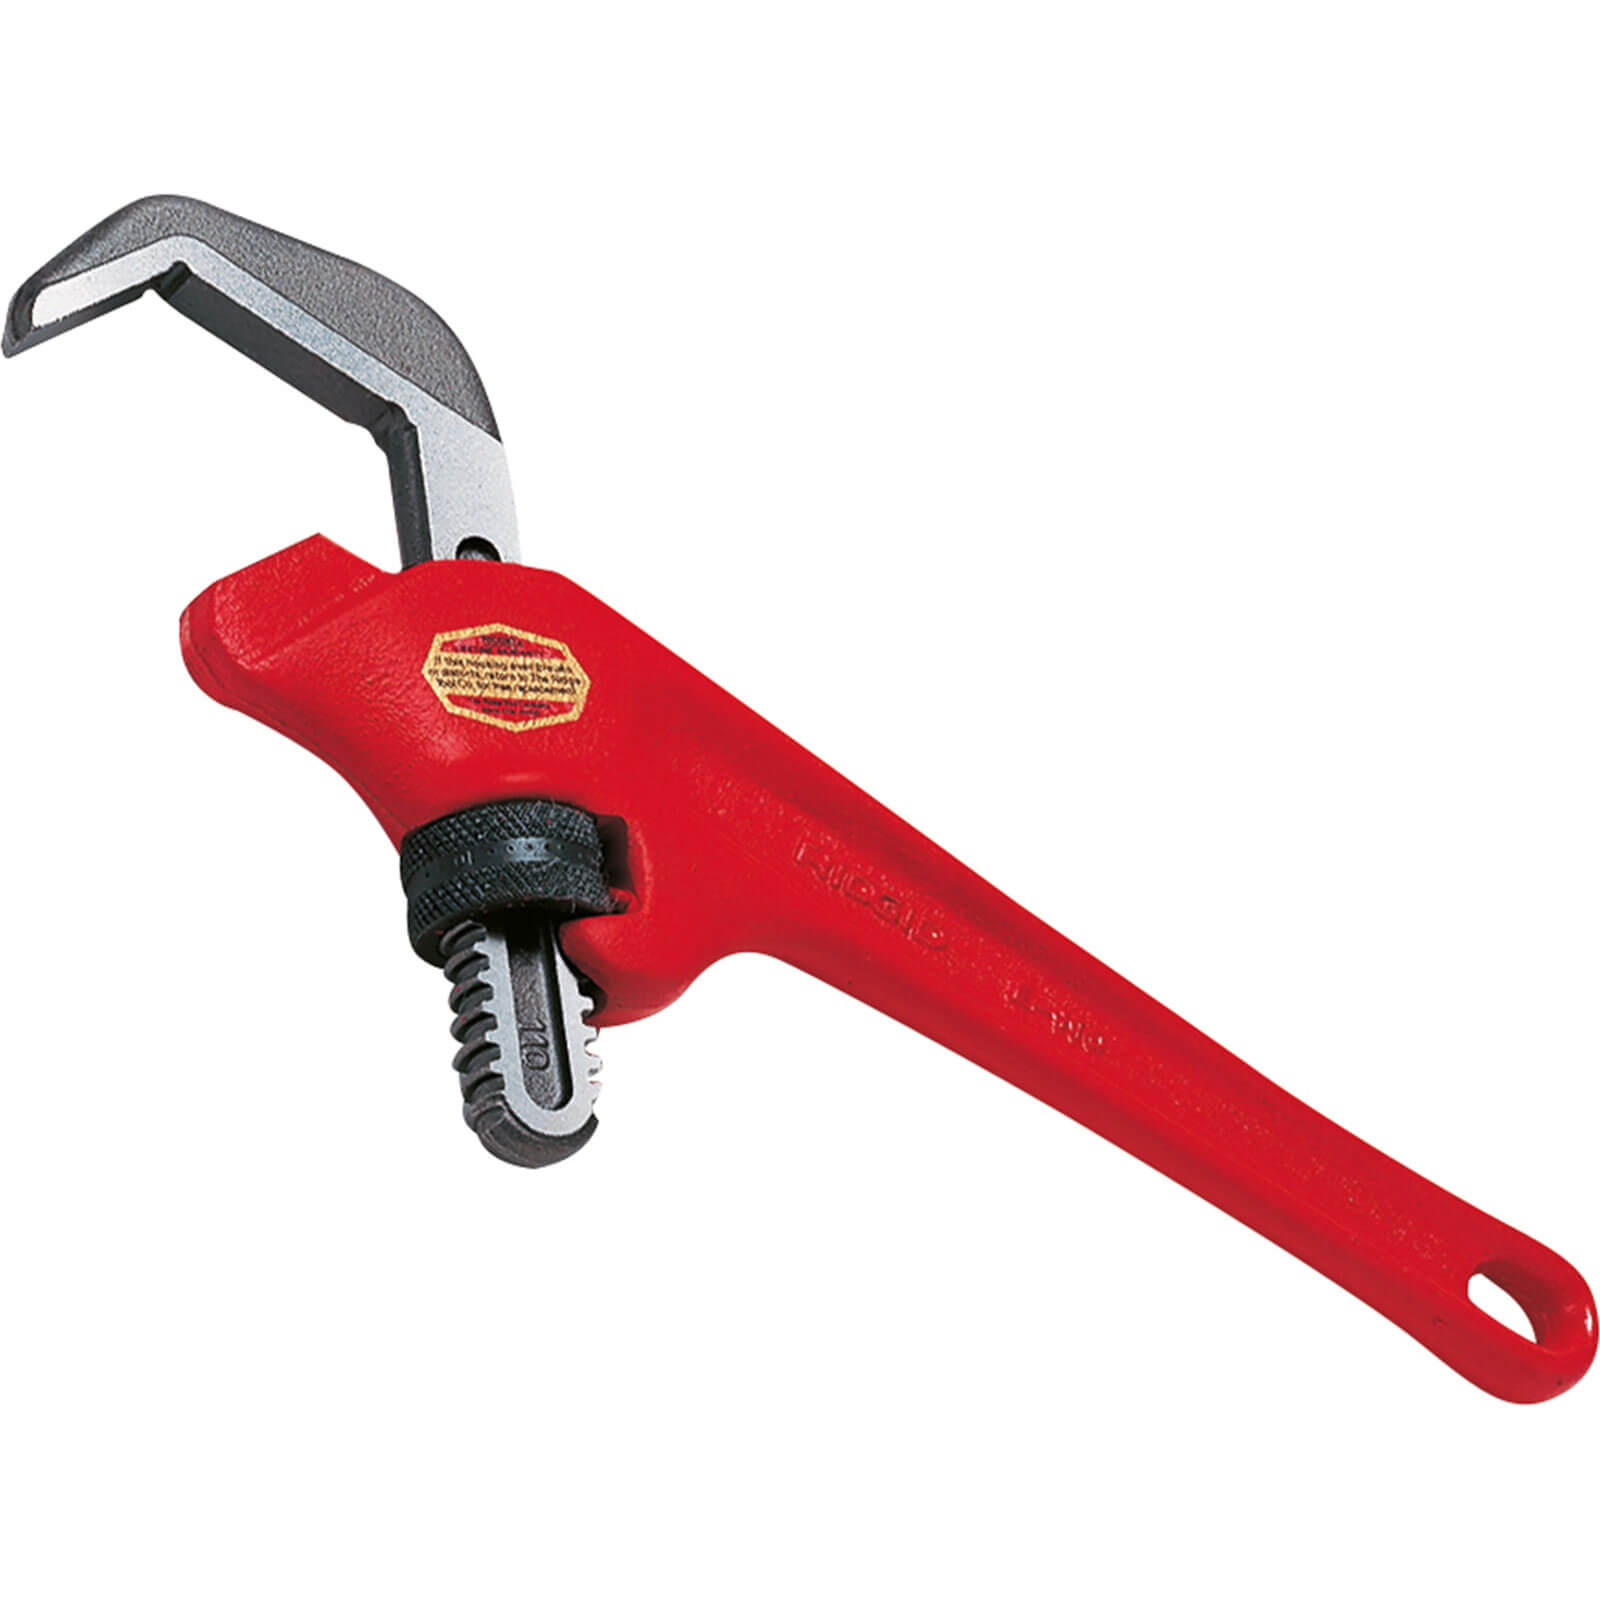 Photo of Ridgid E110 Offset Adjustable Hex Wrench 240mm